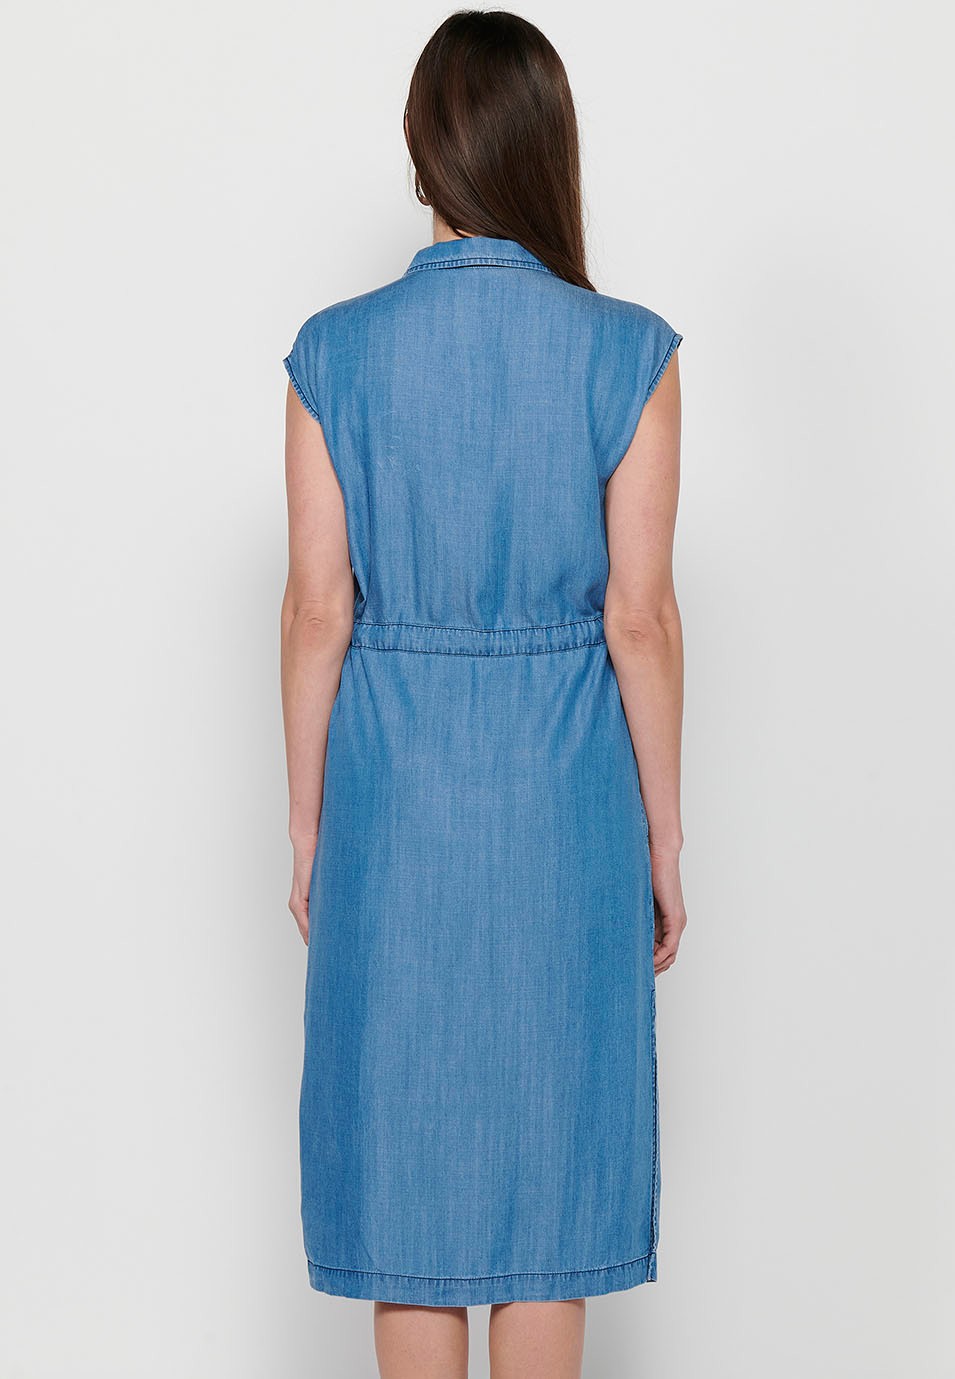 Women's Sleeveless Shirt Style Long Dress with Adjustable Waist with Drawstring and Button Front Closure in Blue 3